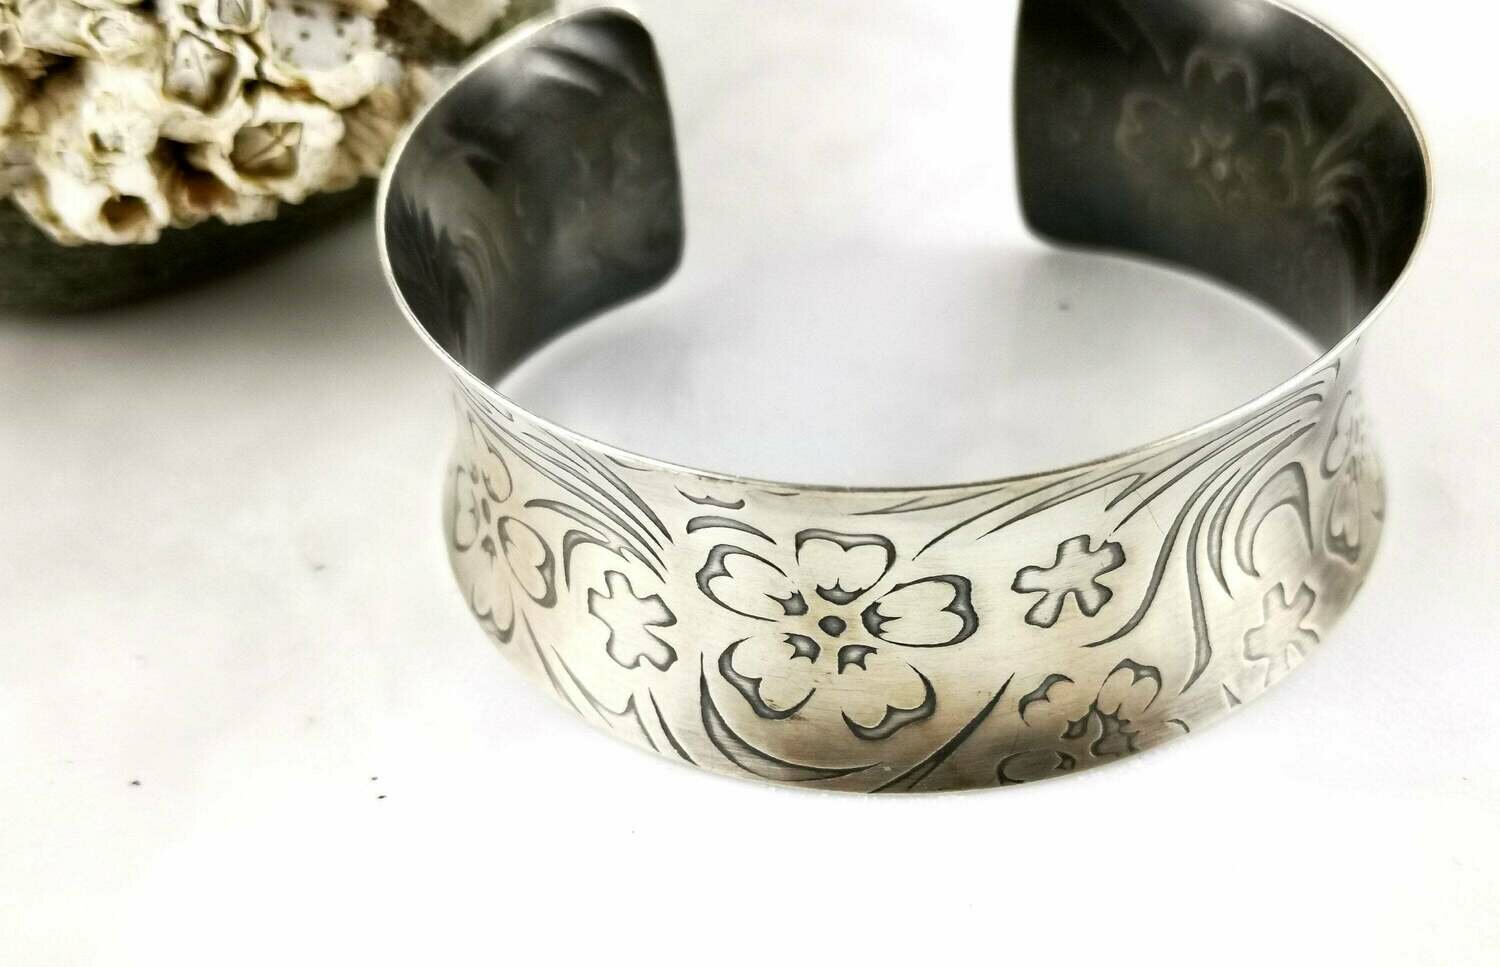 Antiqued Sterling Silver Flower Textured Anticlastic Cuff Bracelet